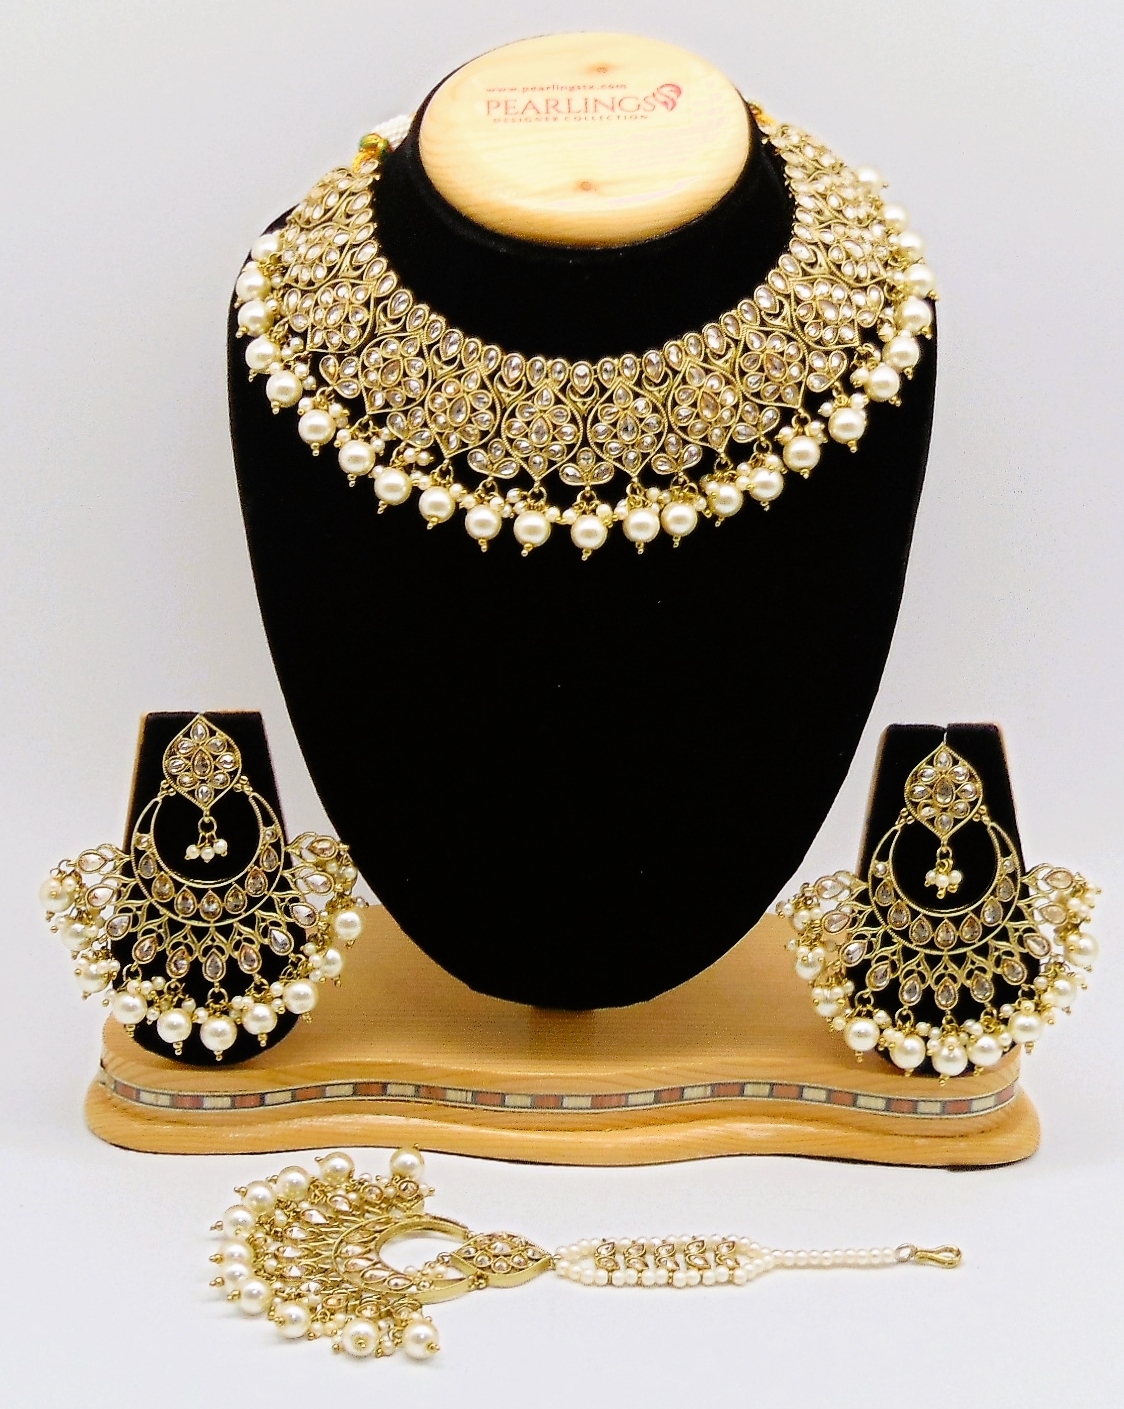 Gold necklace: Buy Gold Necklace Online | Buy necklace online for women |  Online gold necklace shopp… | Gold necklace set, Gold earrings designs, Gold  bride jewelry